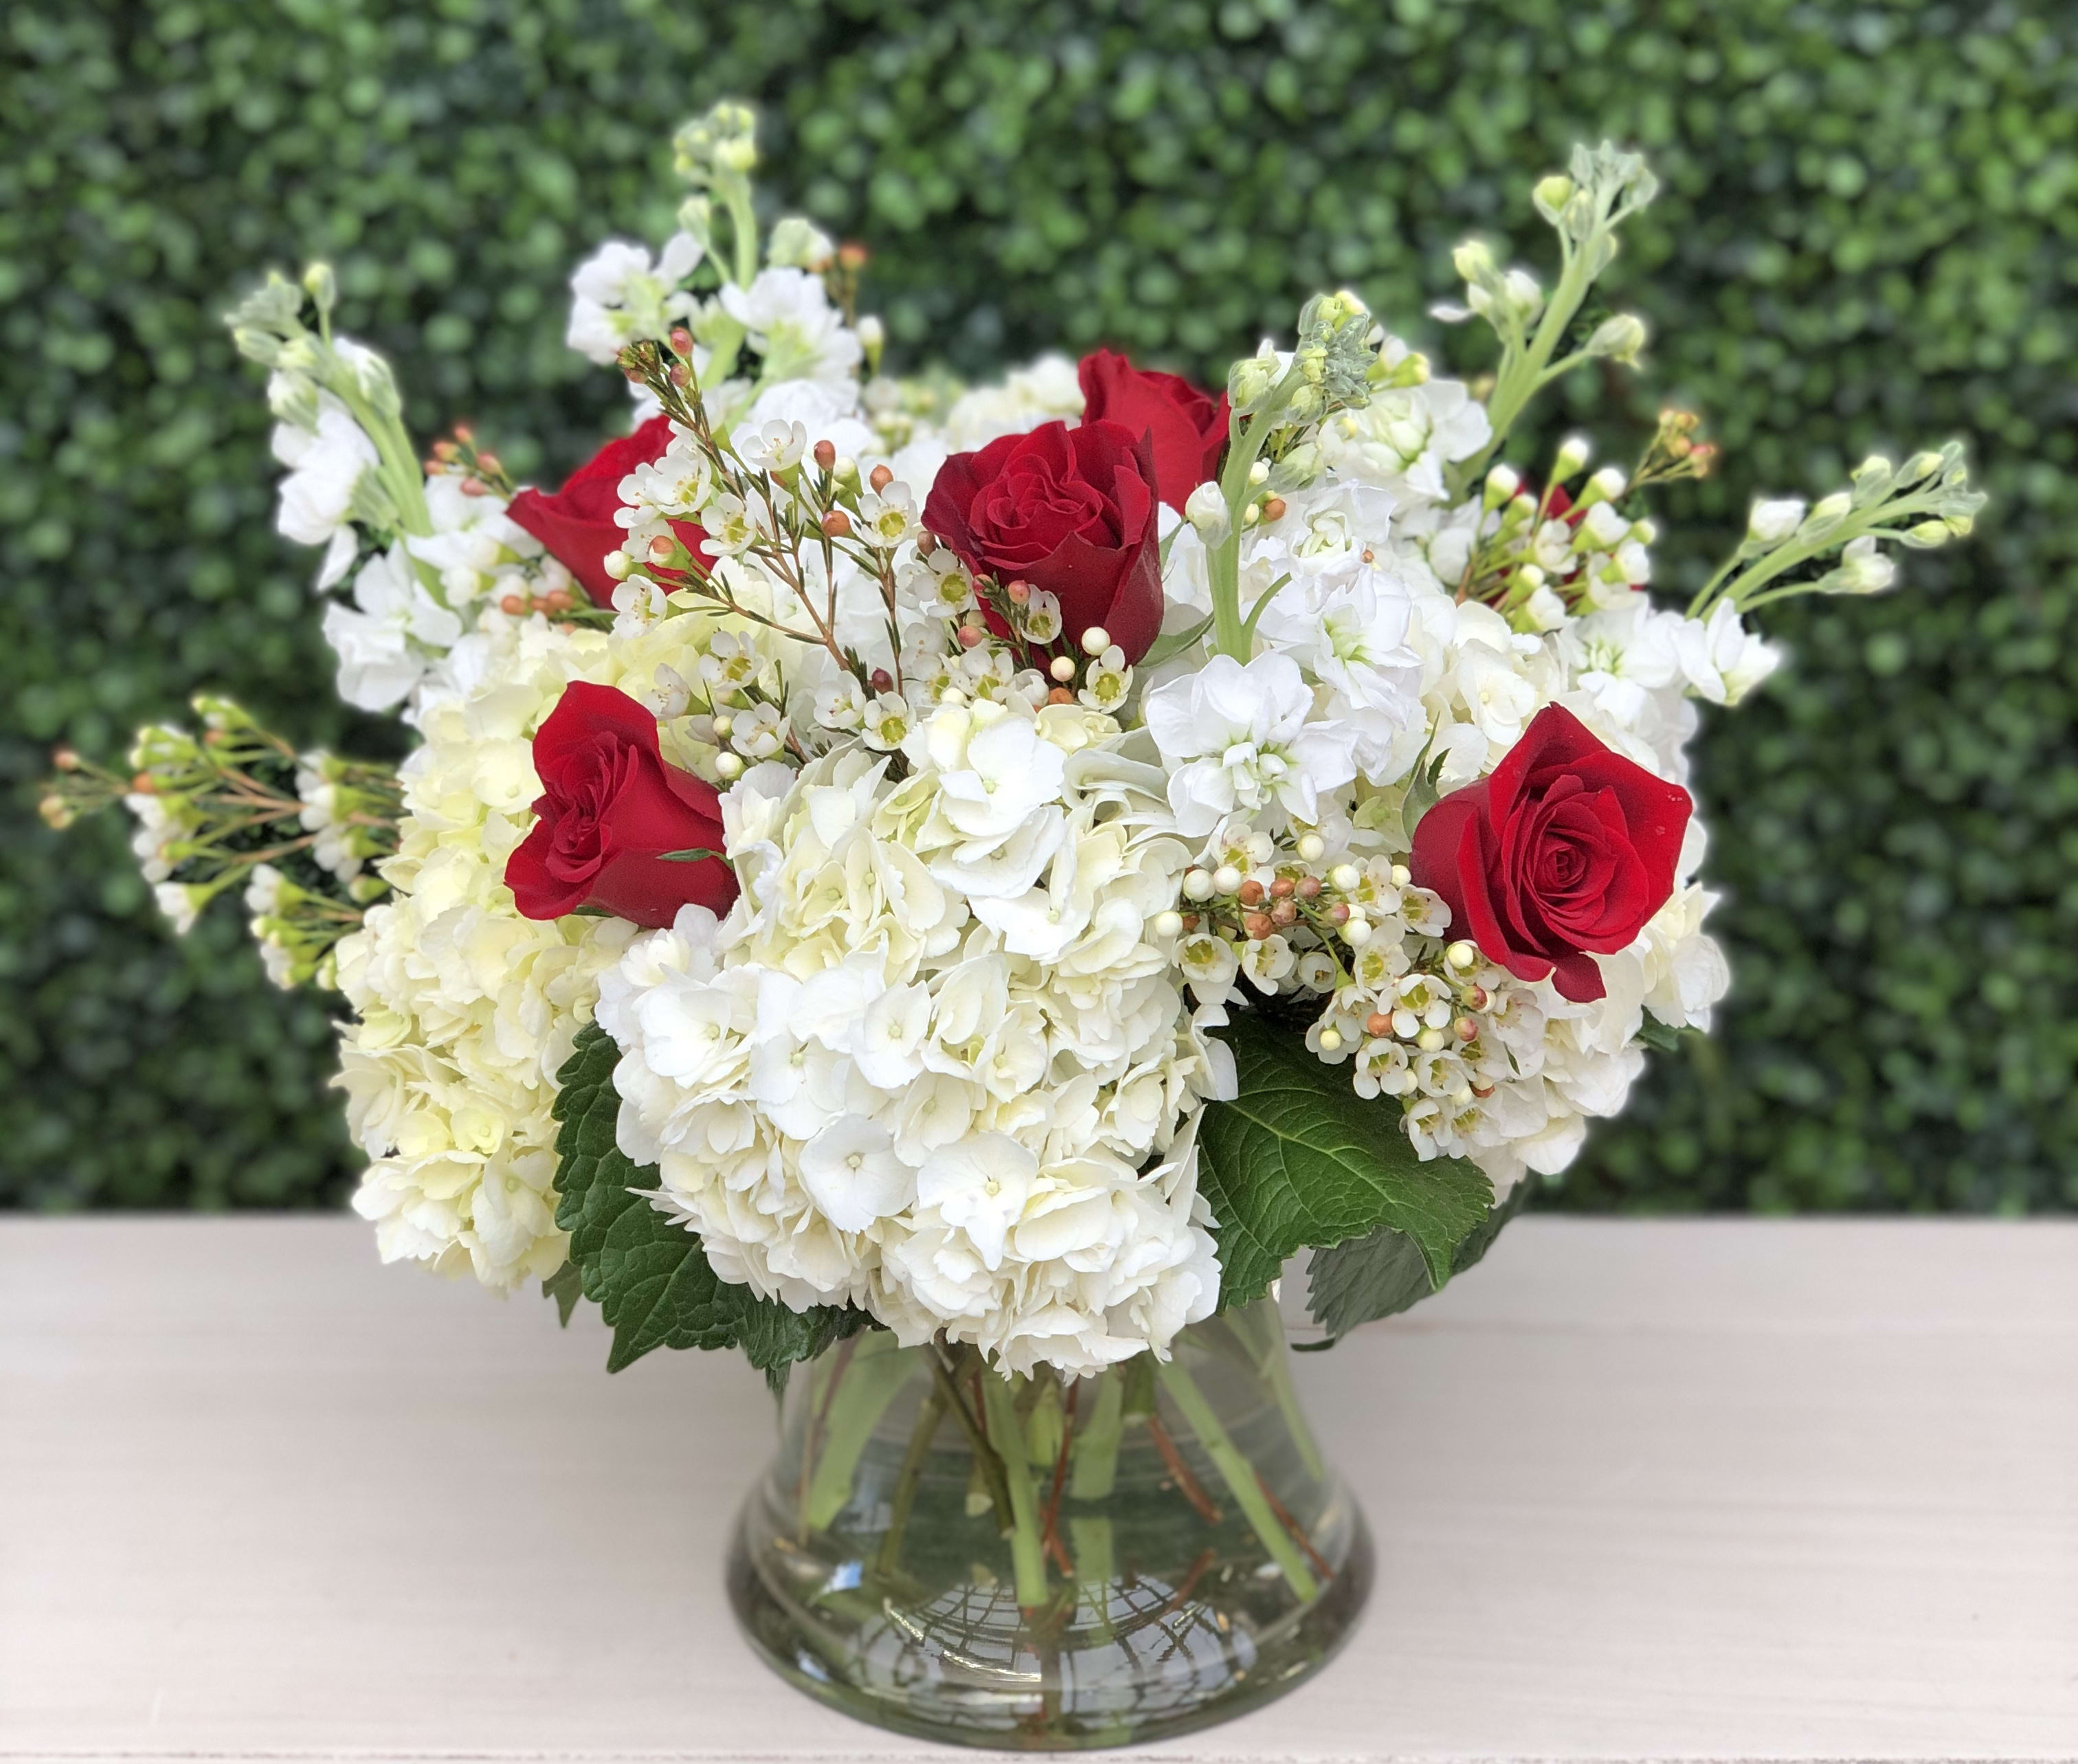 Full Of Romance - A compact arrangement of white hydrangeas, red roses, white stock and white wax flower in a clear glass gathering vase. 